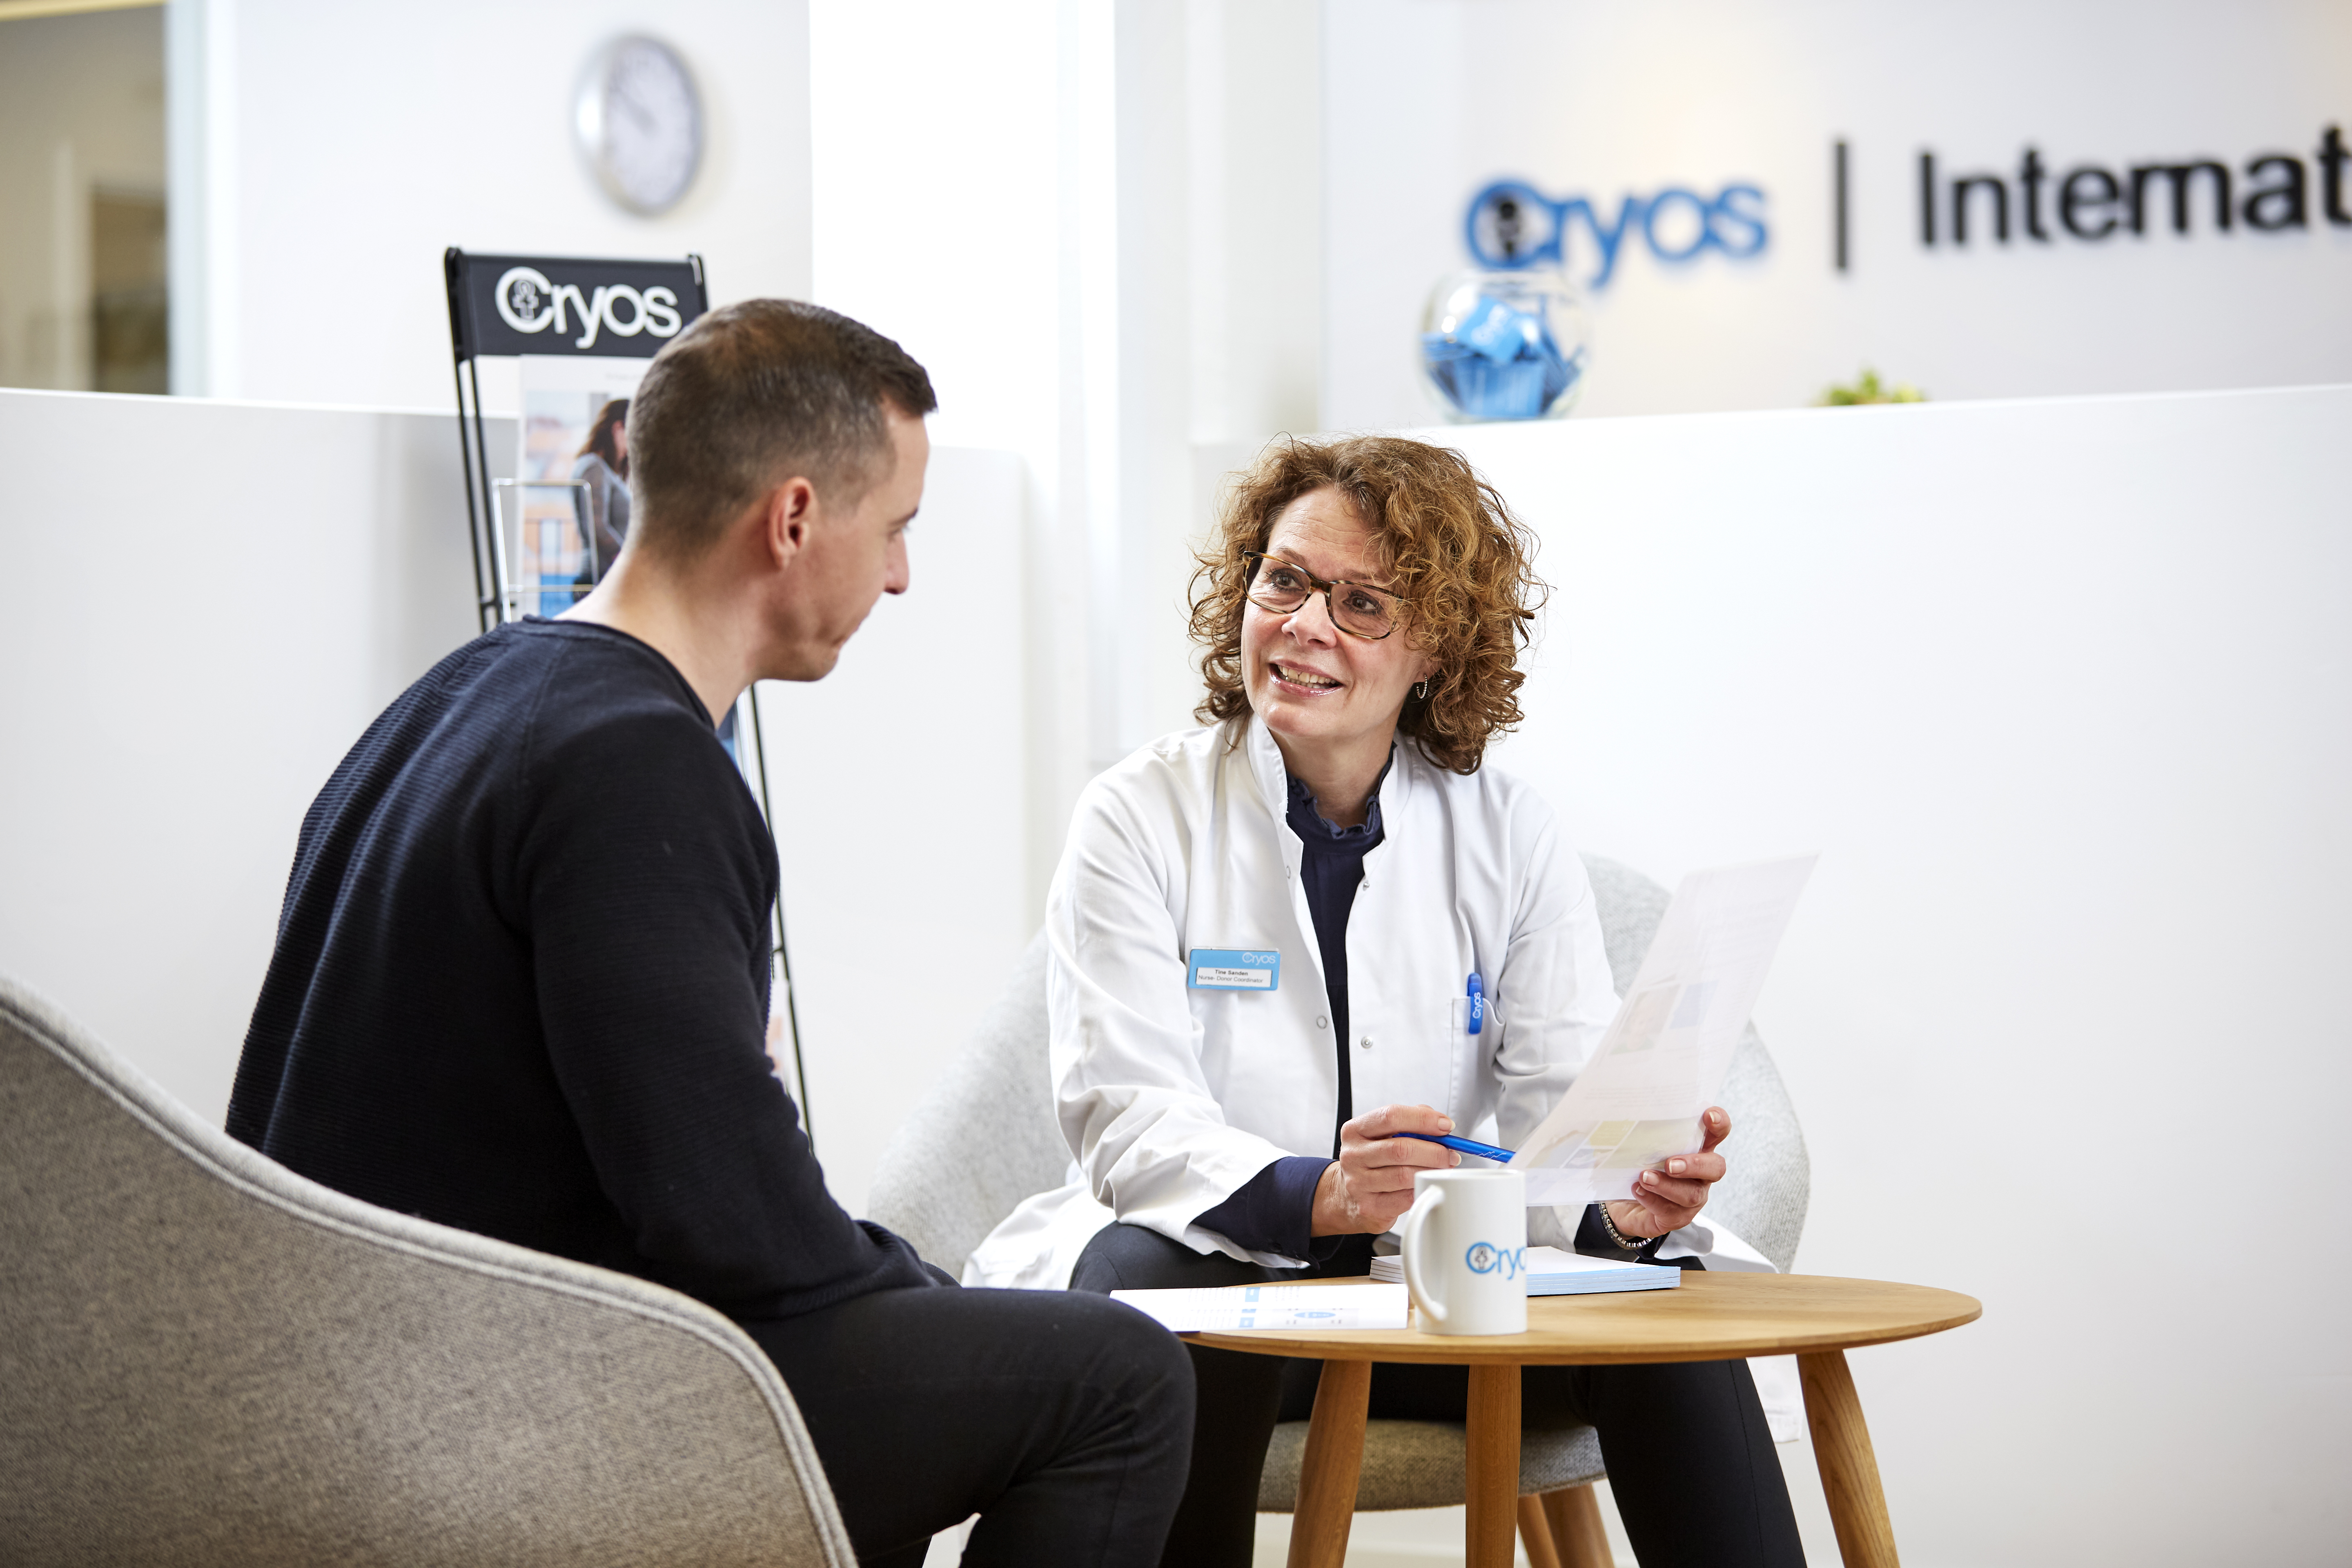 A Cryos donor coordinator having a conversation with a donor – Photo from the Cryos press kit.